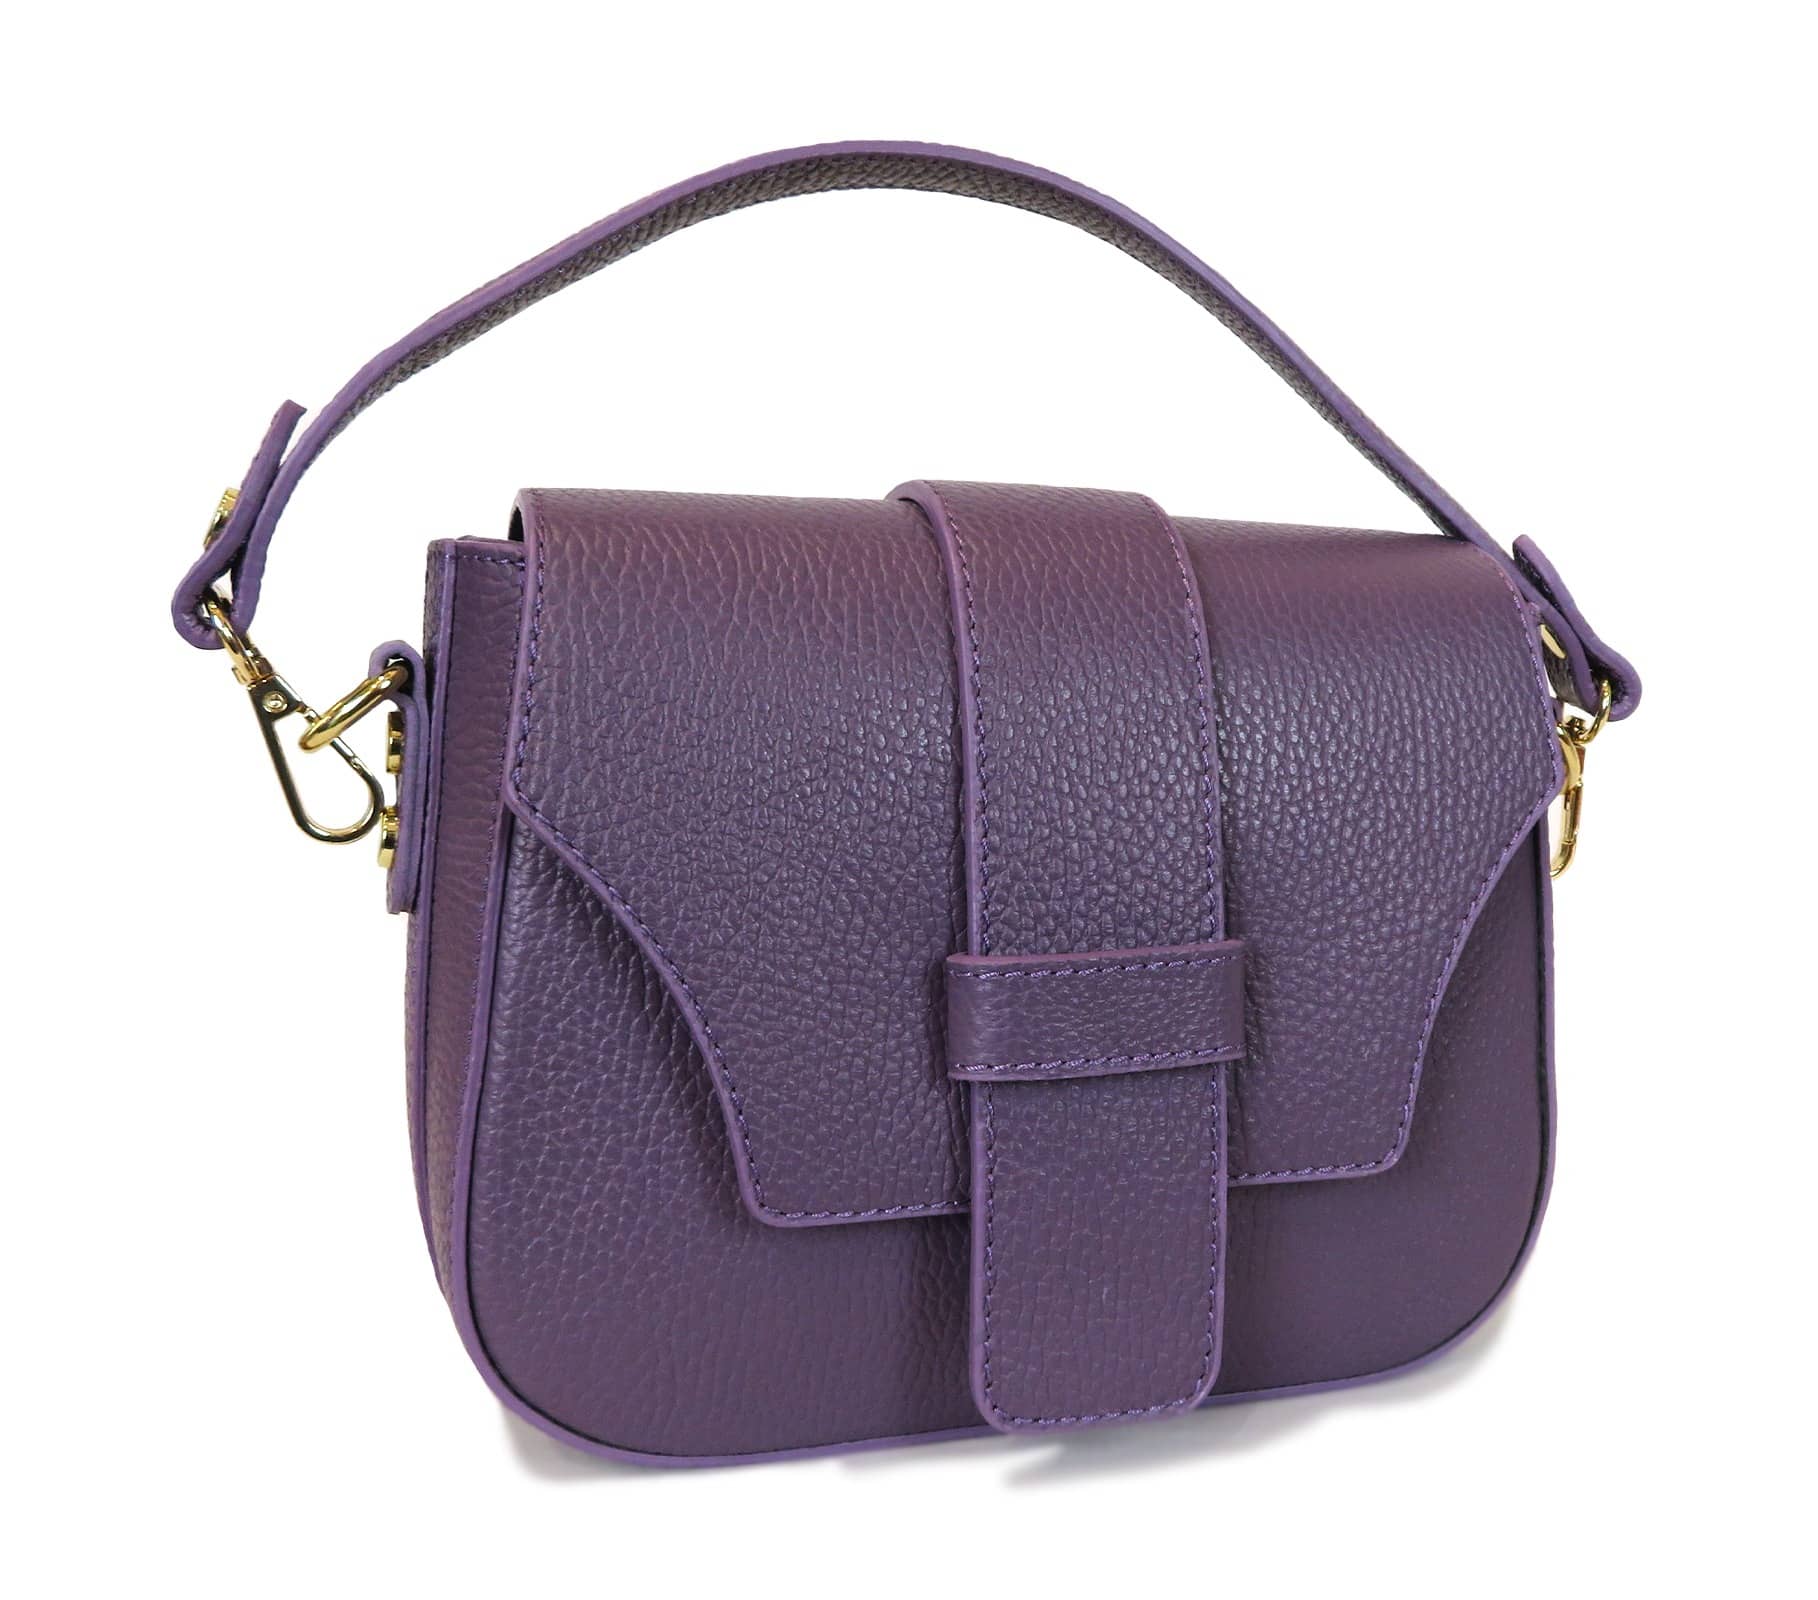 Catalogs : HANDBAGS Italian suppliers for wholesale or private label